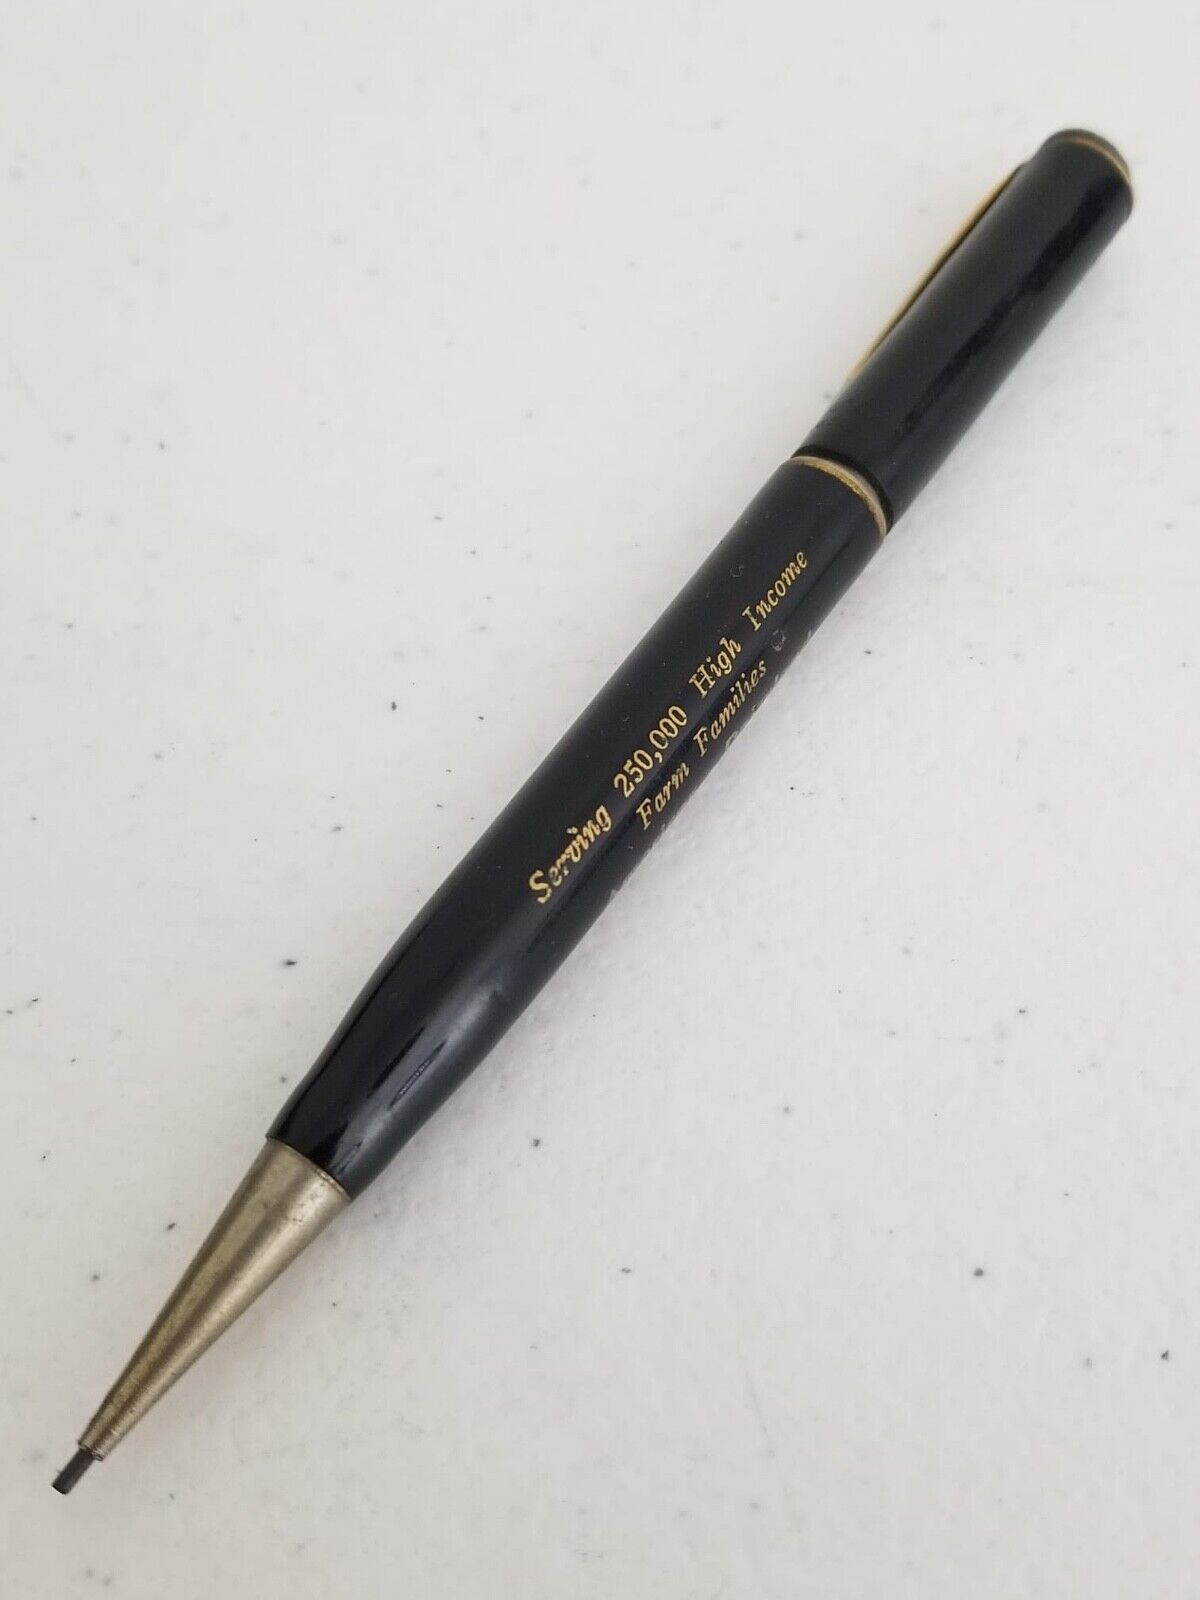 Vintage Farm Family Tribute Mechanical Pencil - Historical Advertising Collectible - TreasuTiques